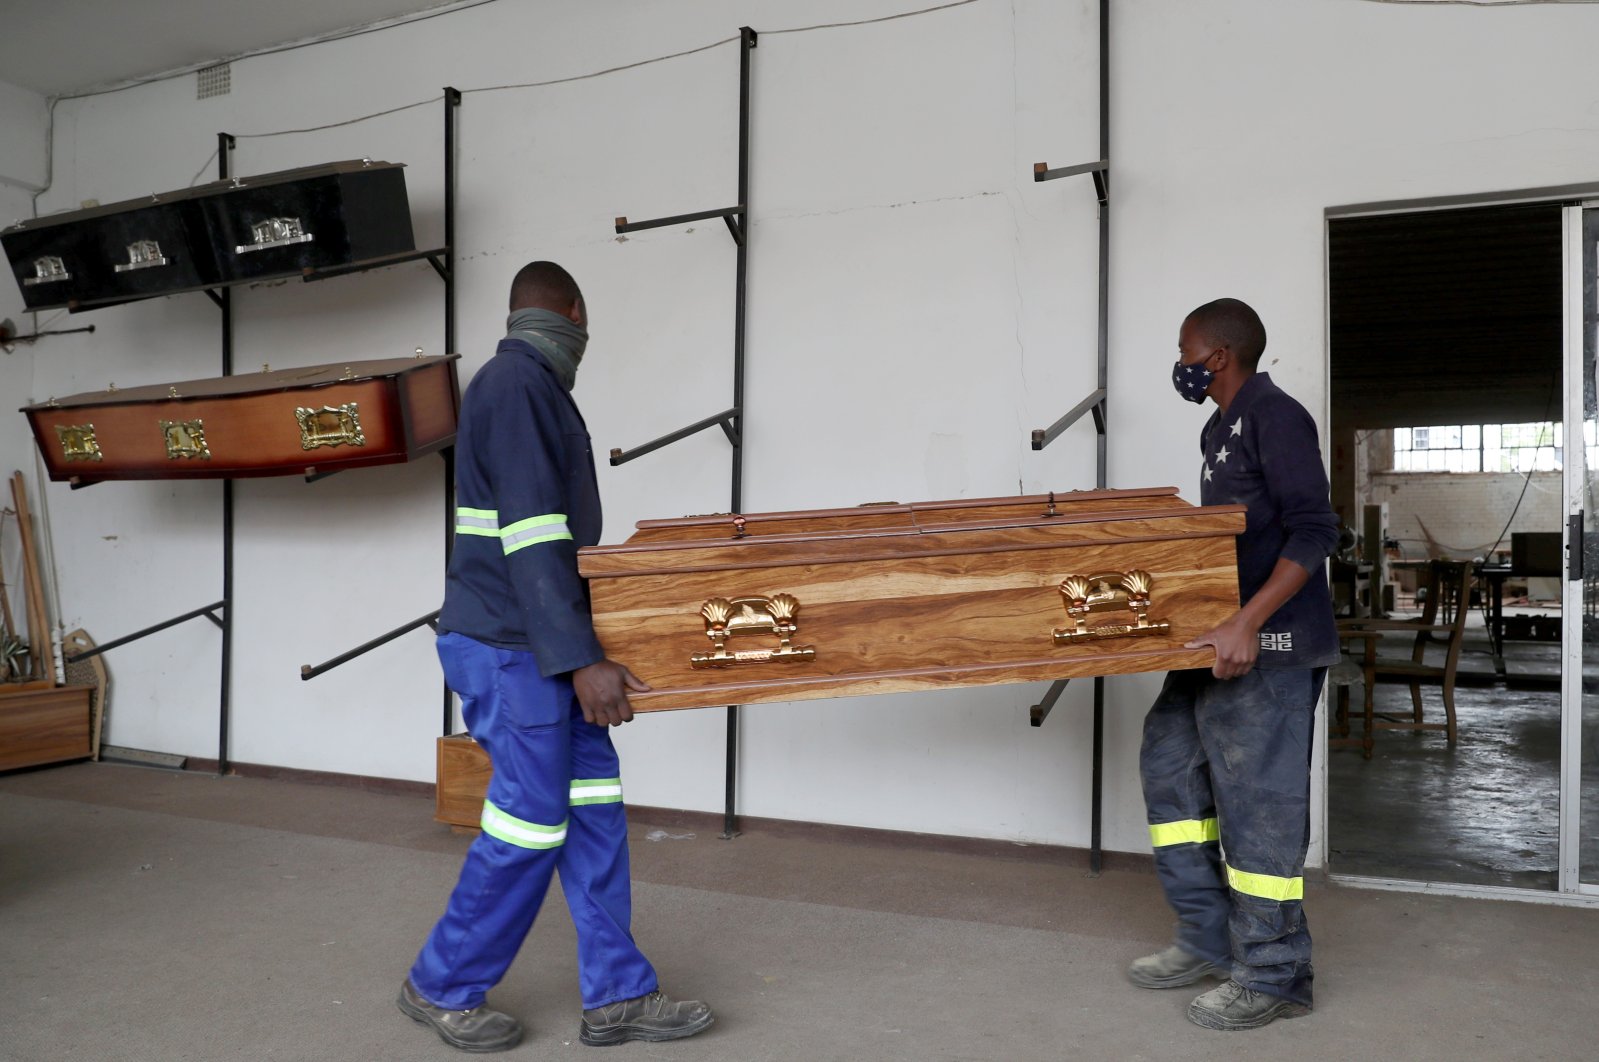 Workers carry a coffin to the display area at the Kingsize Coffins manufacturing plant, amid a nationwide coronavirus lockdown, in Benoni, South Africa, Jan. 25, 2021. (Reuters Photo)